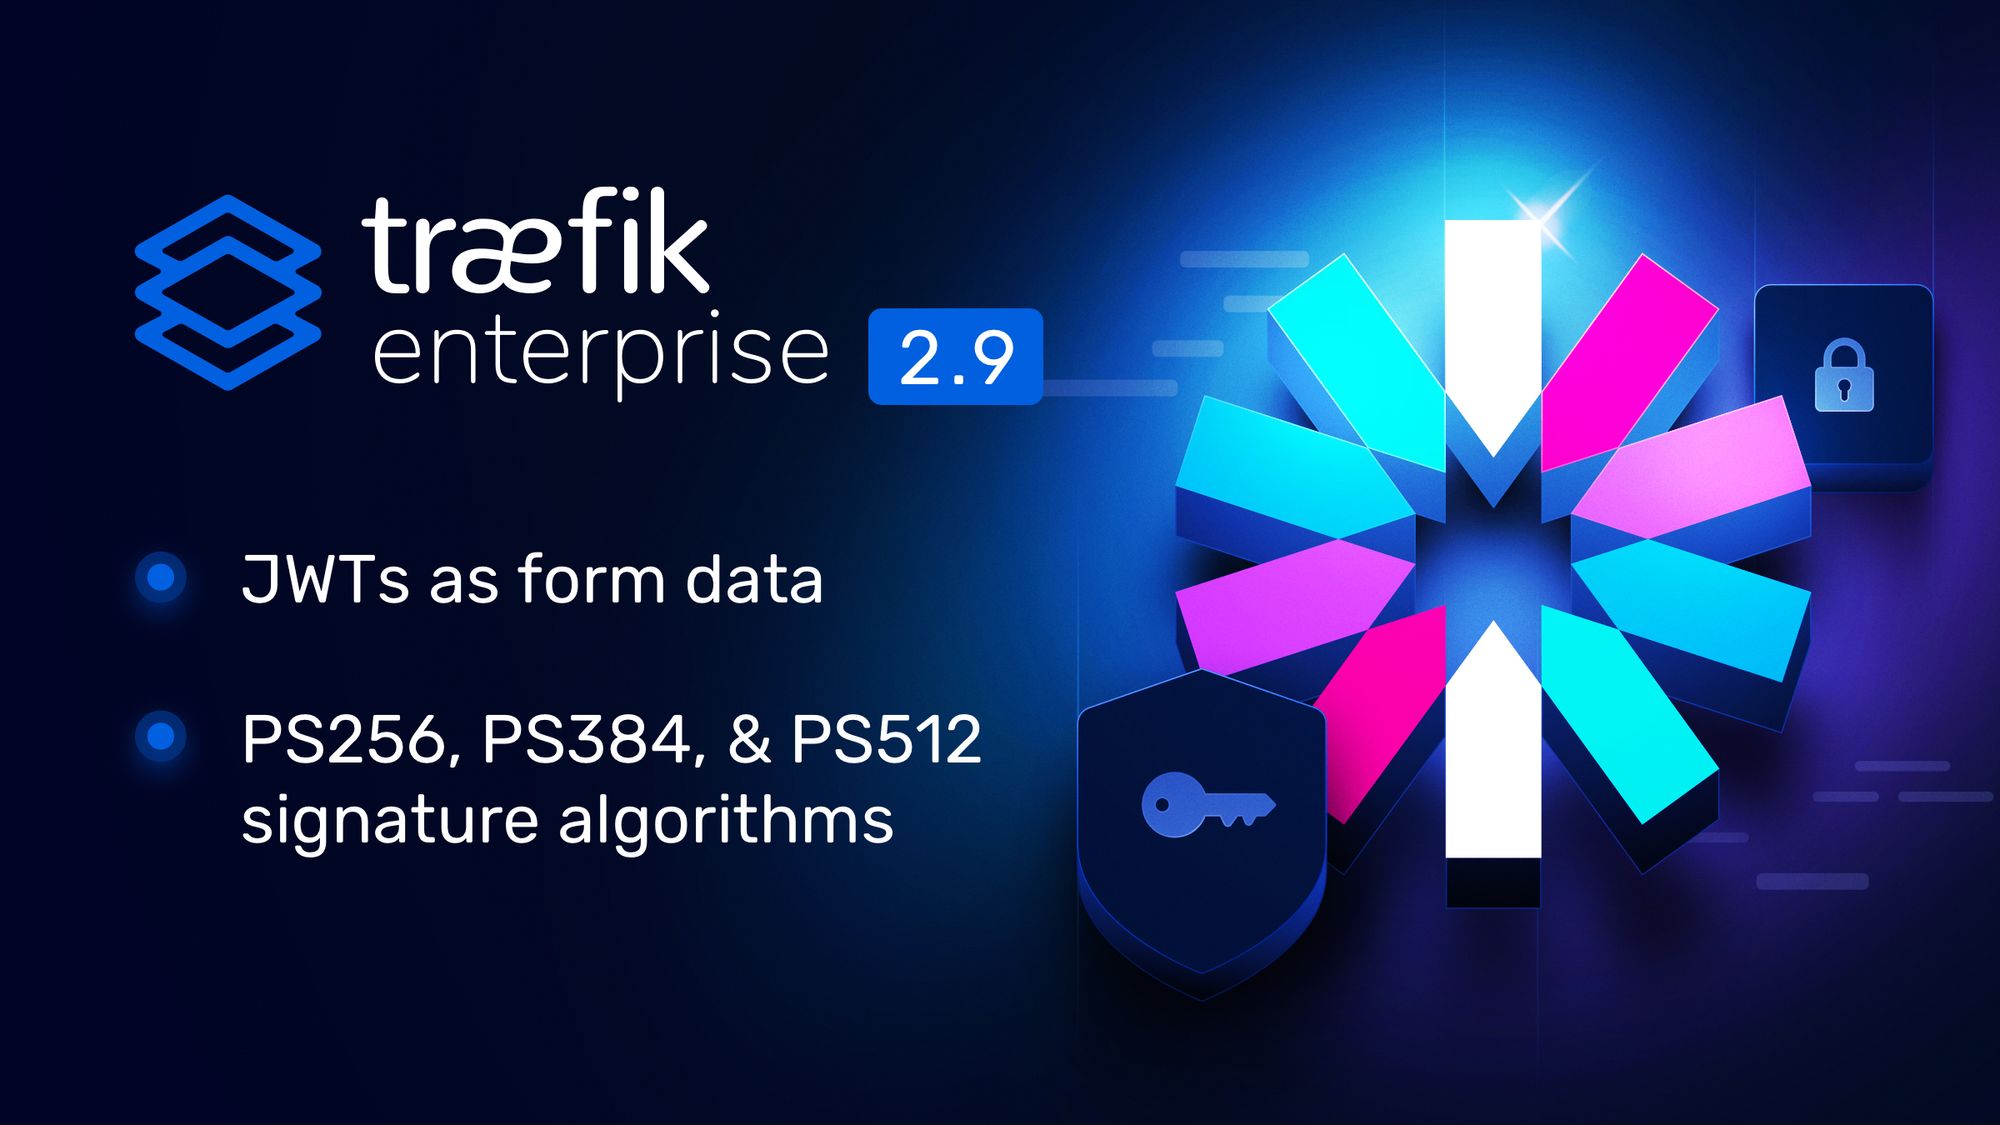 traefik enterprise 2.9 with improvements for the JWT middleware